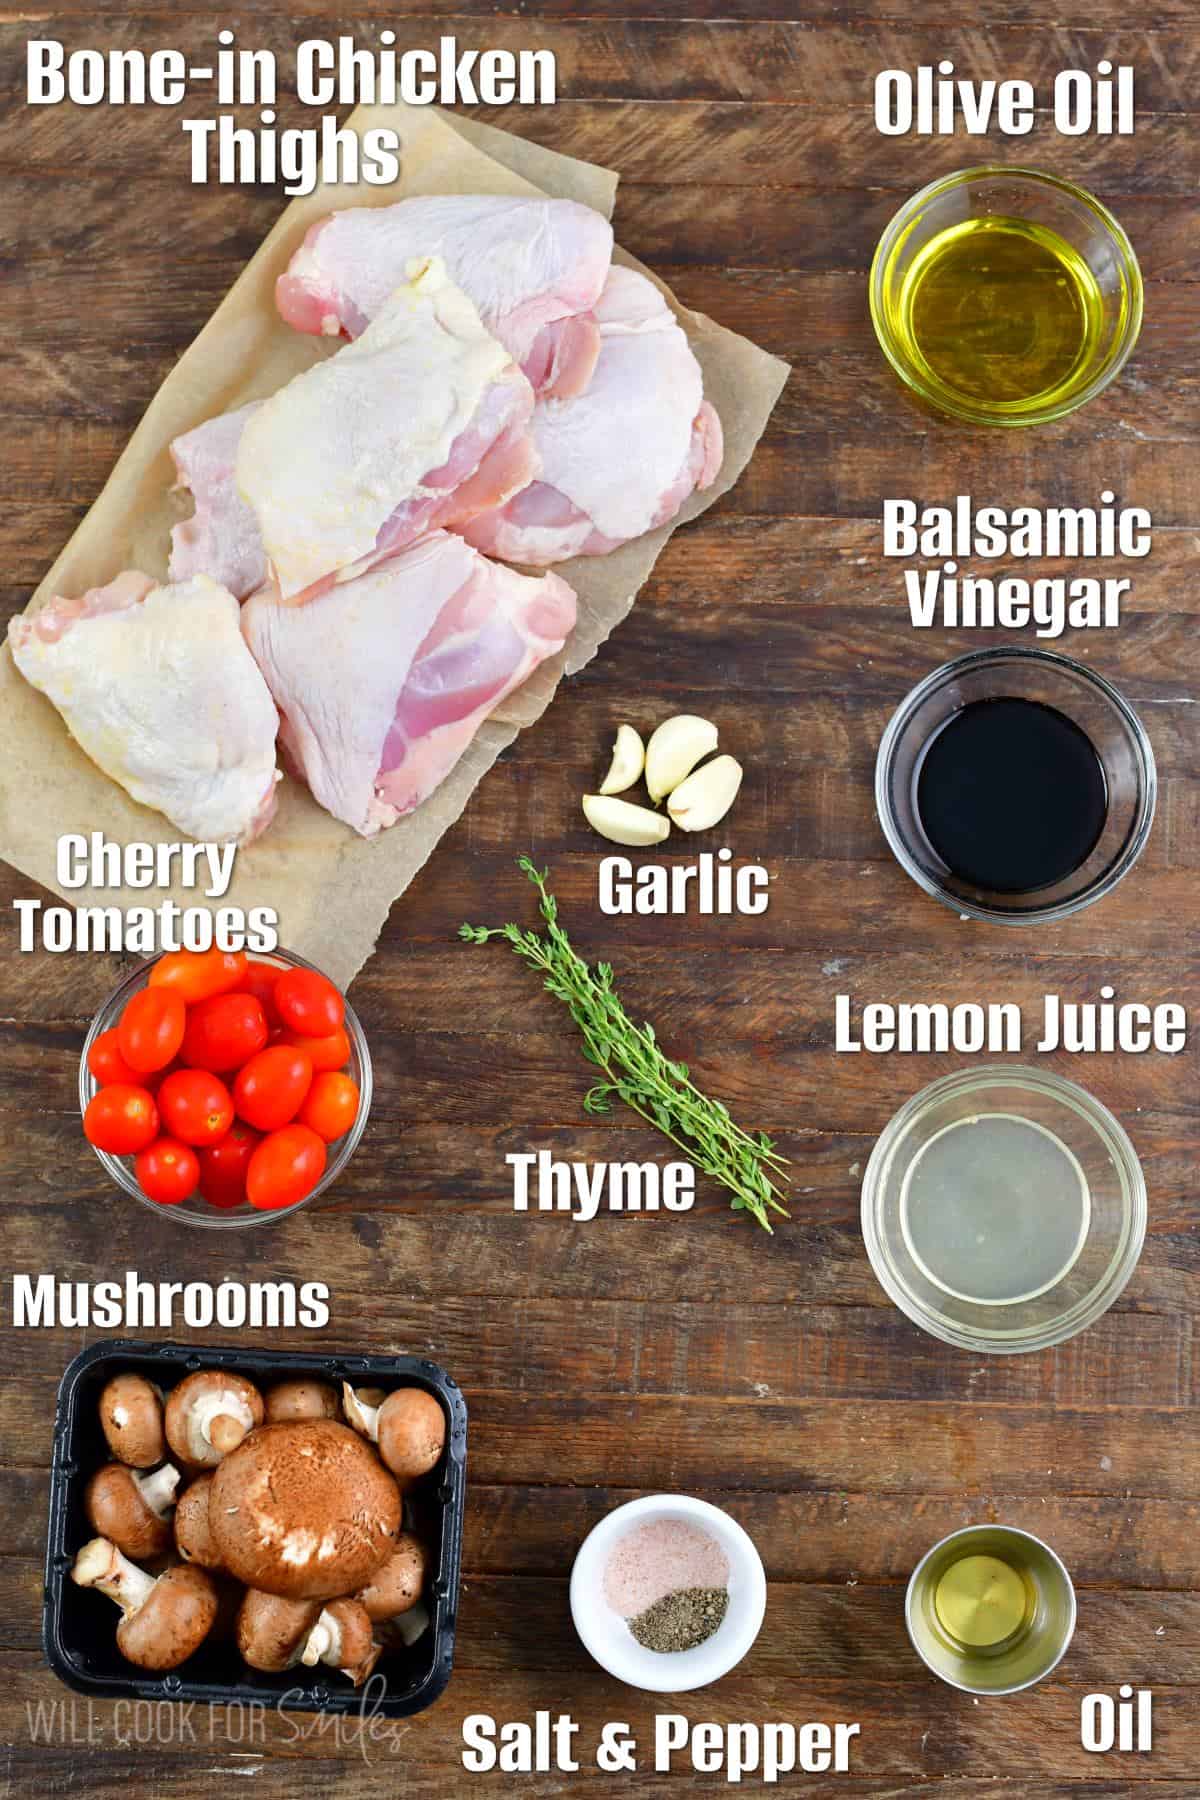 Labeled ingredients for balsamic baked chicken thighs on a wood surface.